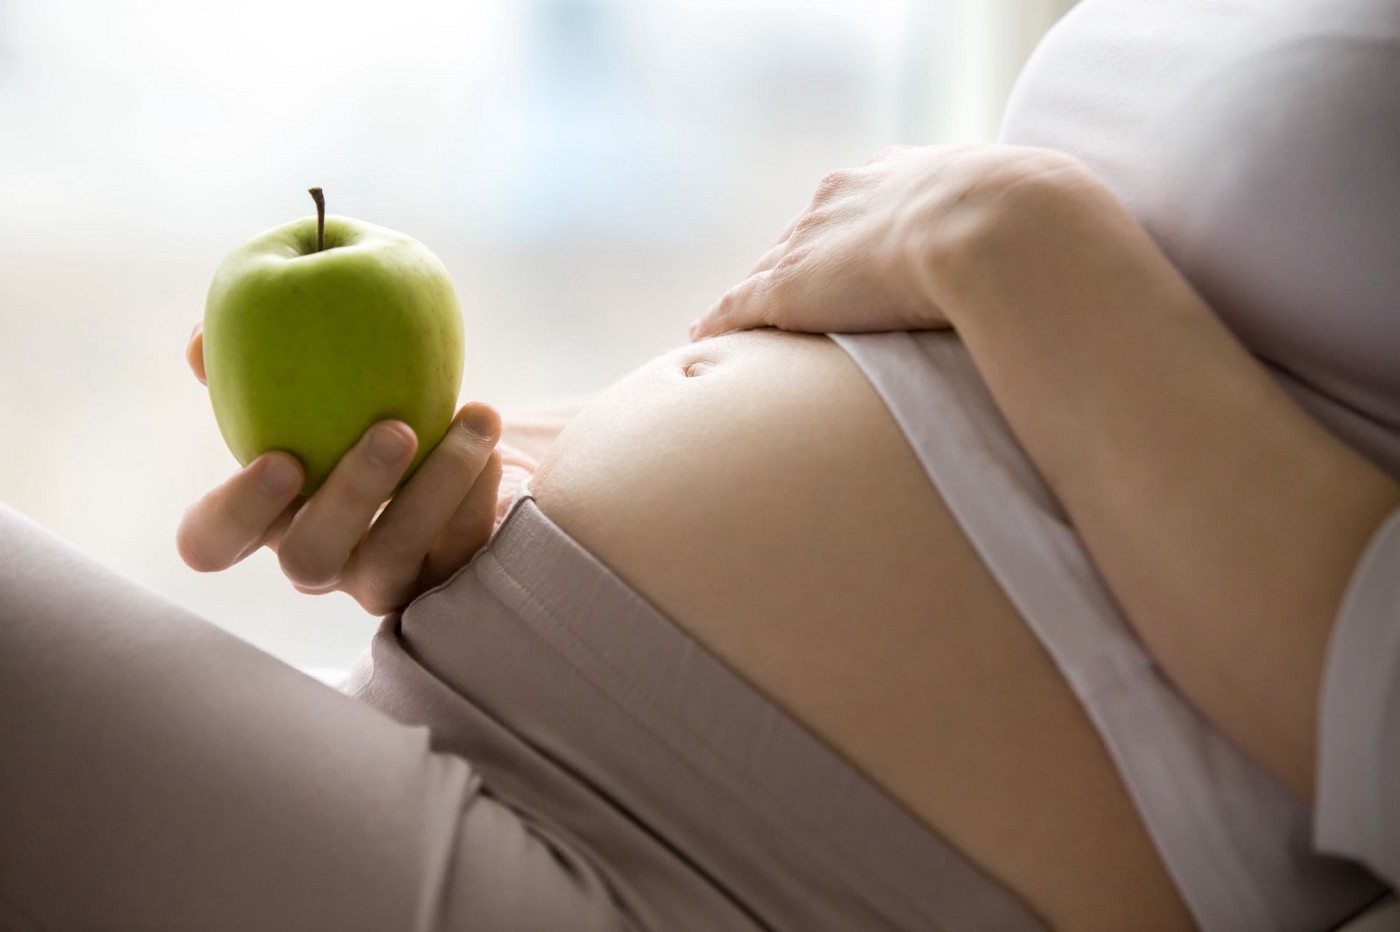 A pregnant woman holding a green apple.